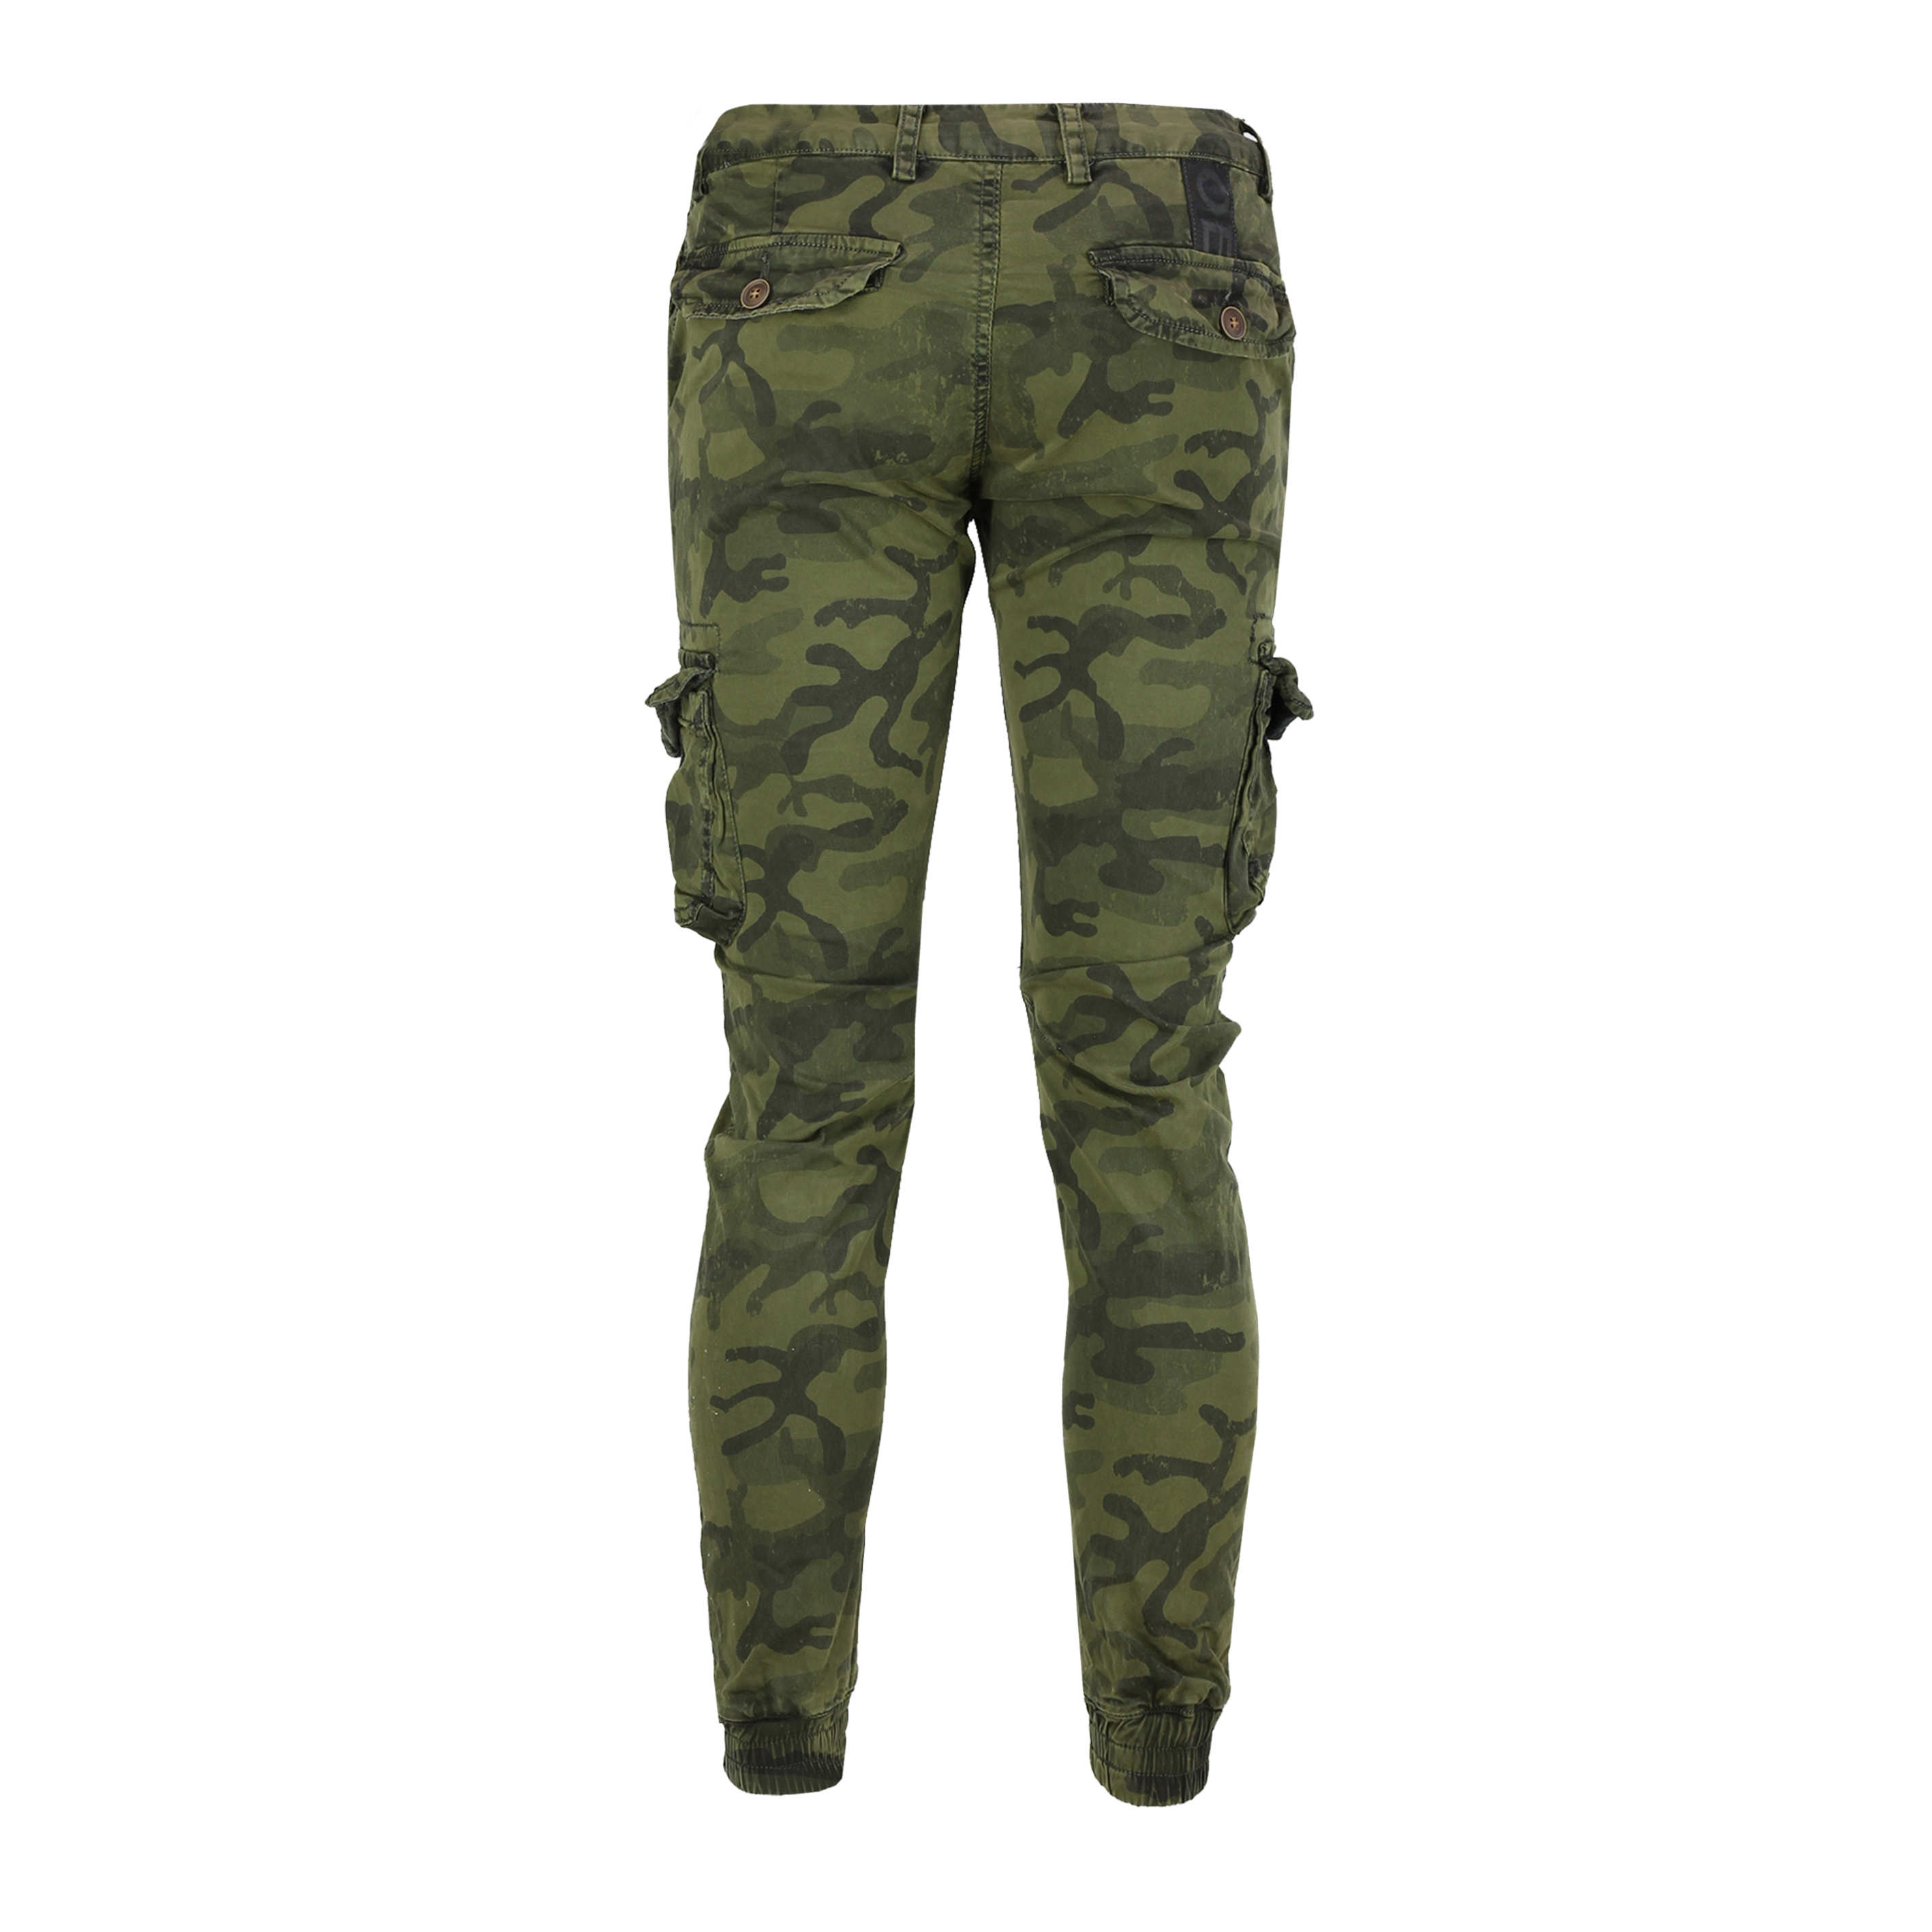 GenericMen Camouflage Pants Military Army Combat Work Trousers Casual Cargo Pants 